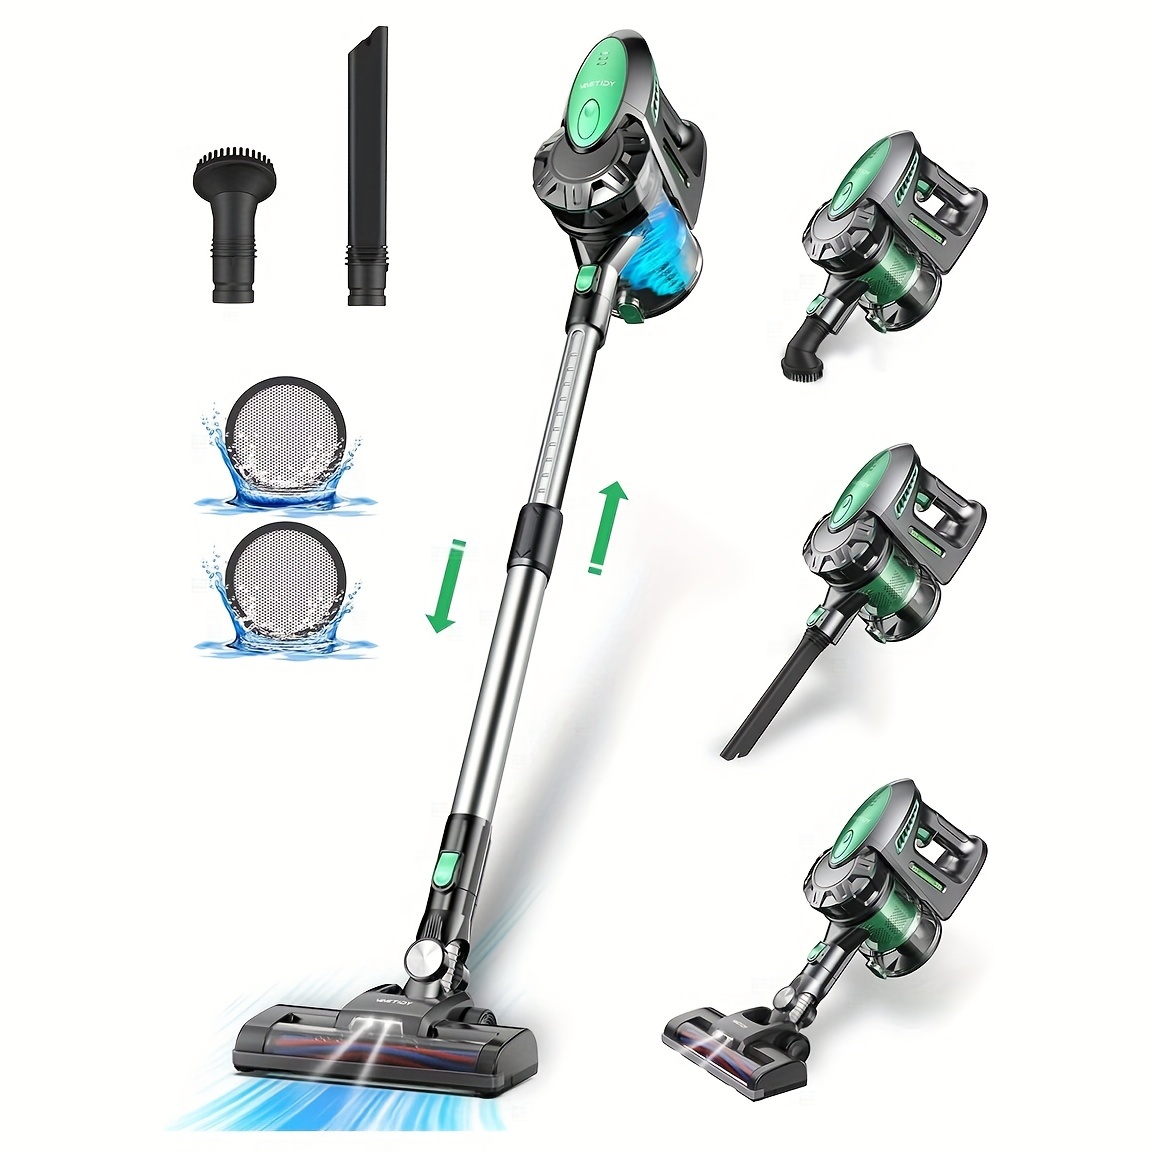 

Vactidy Cordless Vacuum Cleaner, V8 Stick Vacuum Cleaner Powerful Suction, Long Runtime With Detachable Battery, 6 In 1 Lightweight Hoover Cordless For Hardwood Floor Carpet Pet Hair